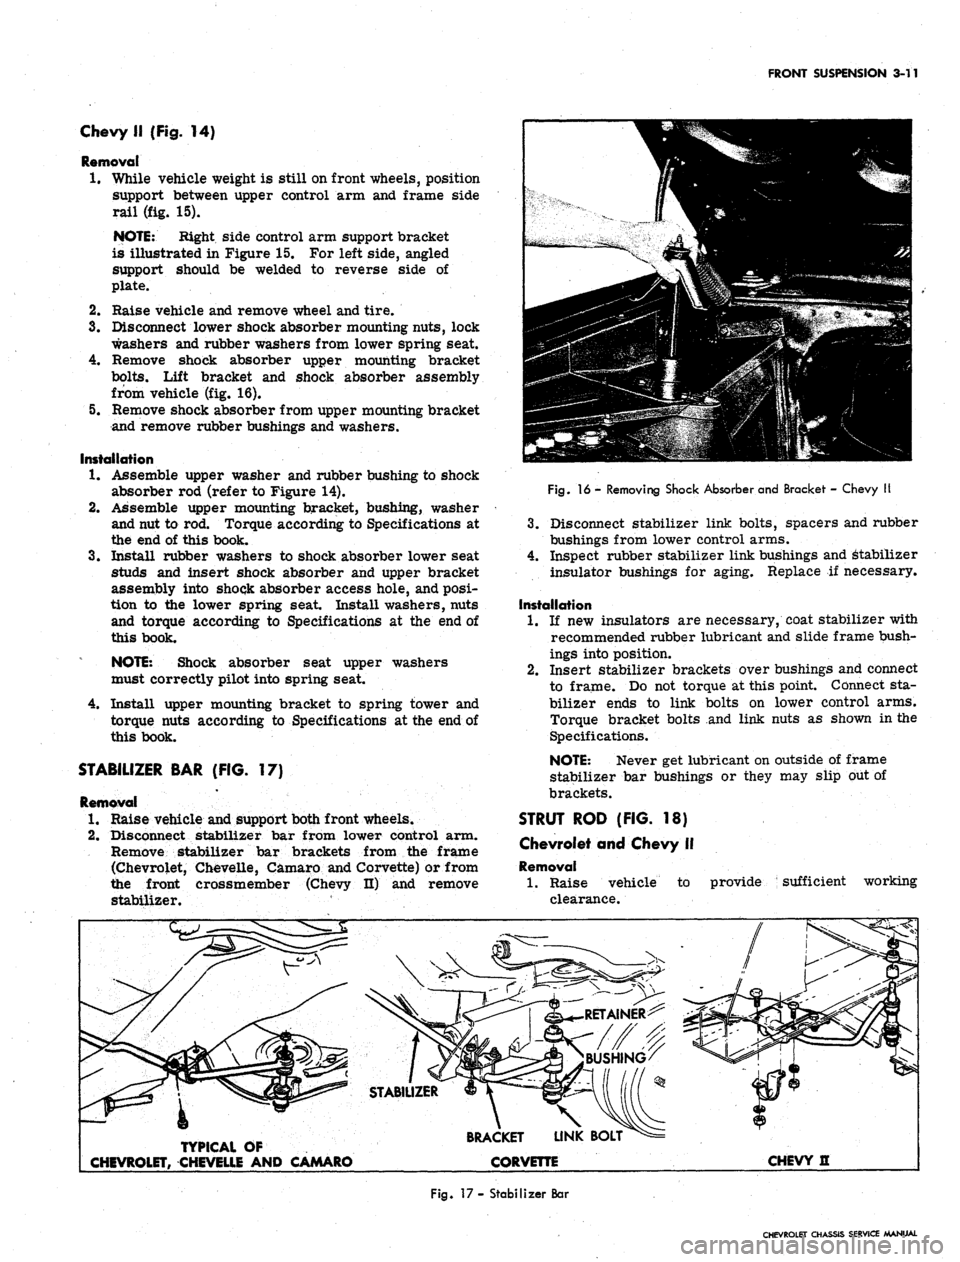 CHEVROLET CAMARO 1967 1.G Chassis Workshop Manual 
FRONT SUSPENSION 3-11

Chevy II (Fig. 14)

Removal

1.
 While vehicle weight is still on front wheels, position

support between upper control arm and frame side

rail (fig. 15).

NOTE: Bight side co